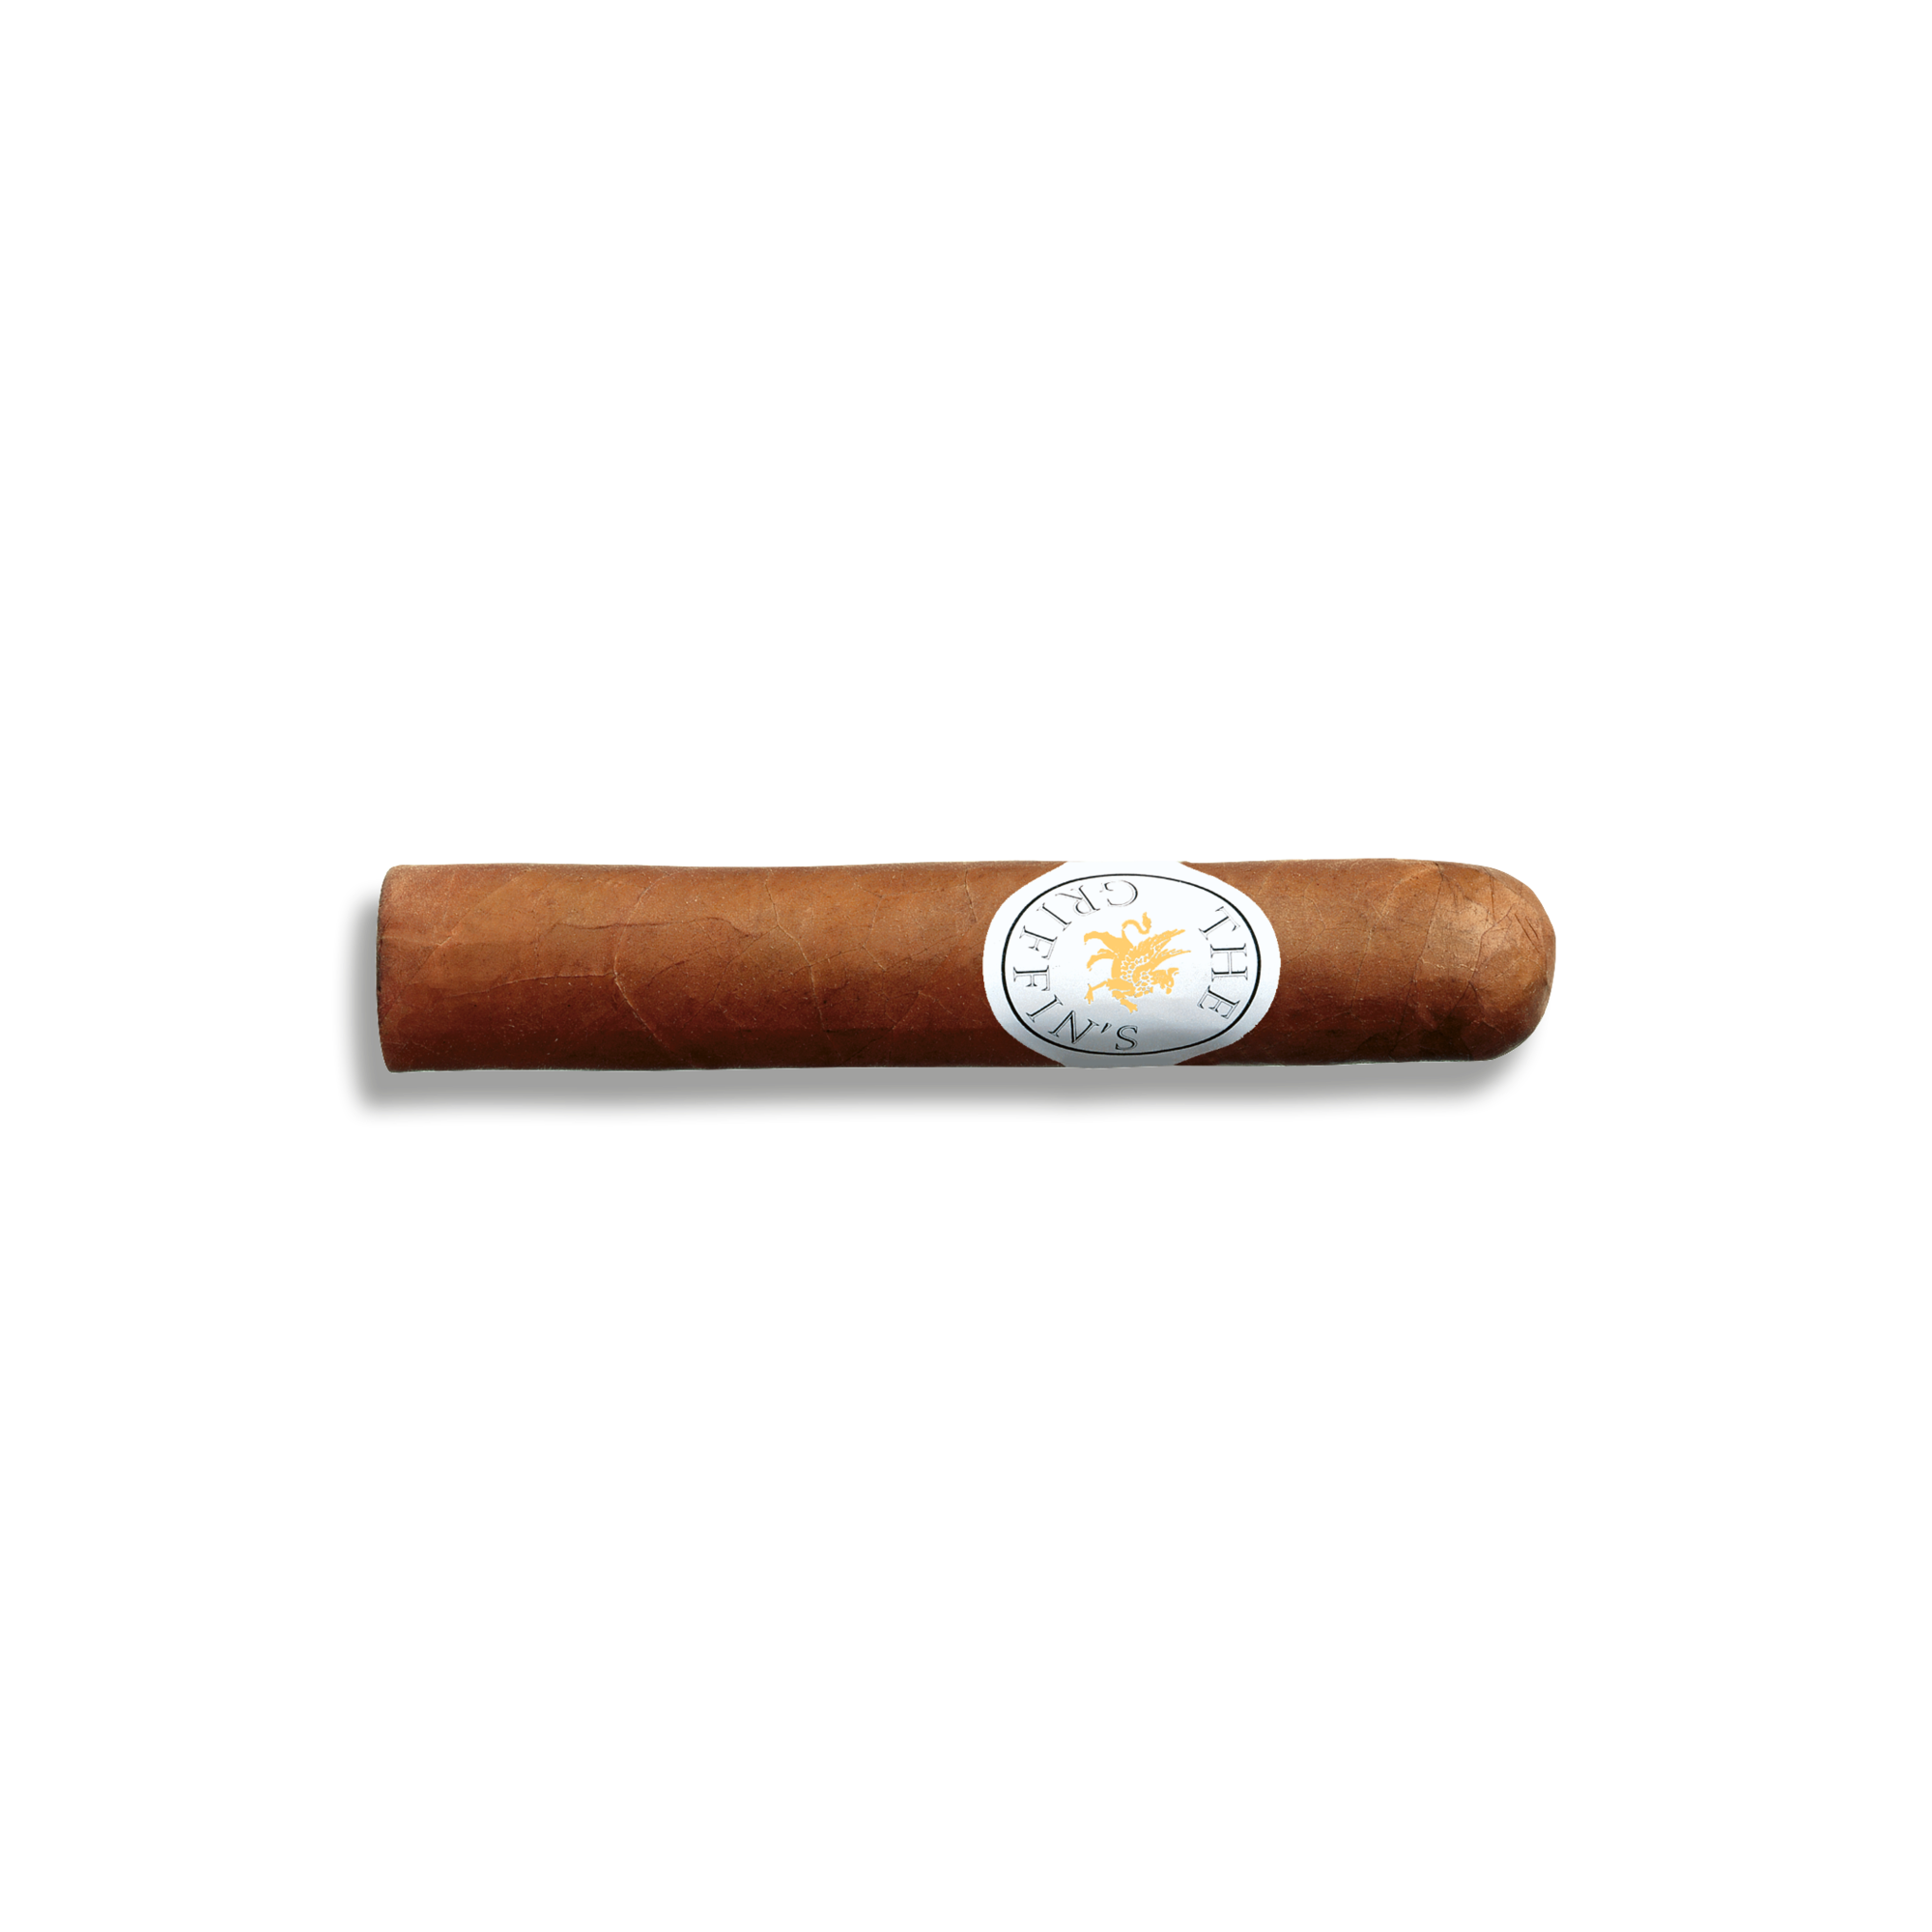 Griffin's Classic Short Robusto